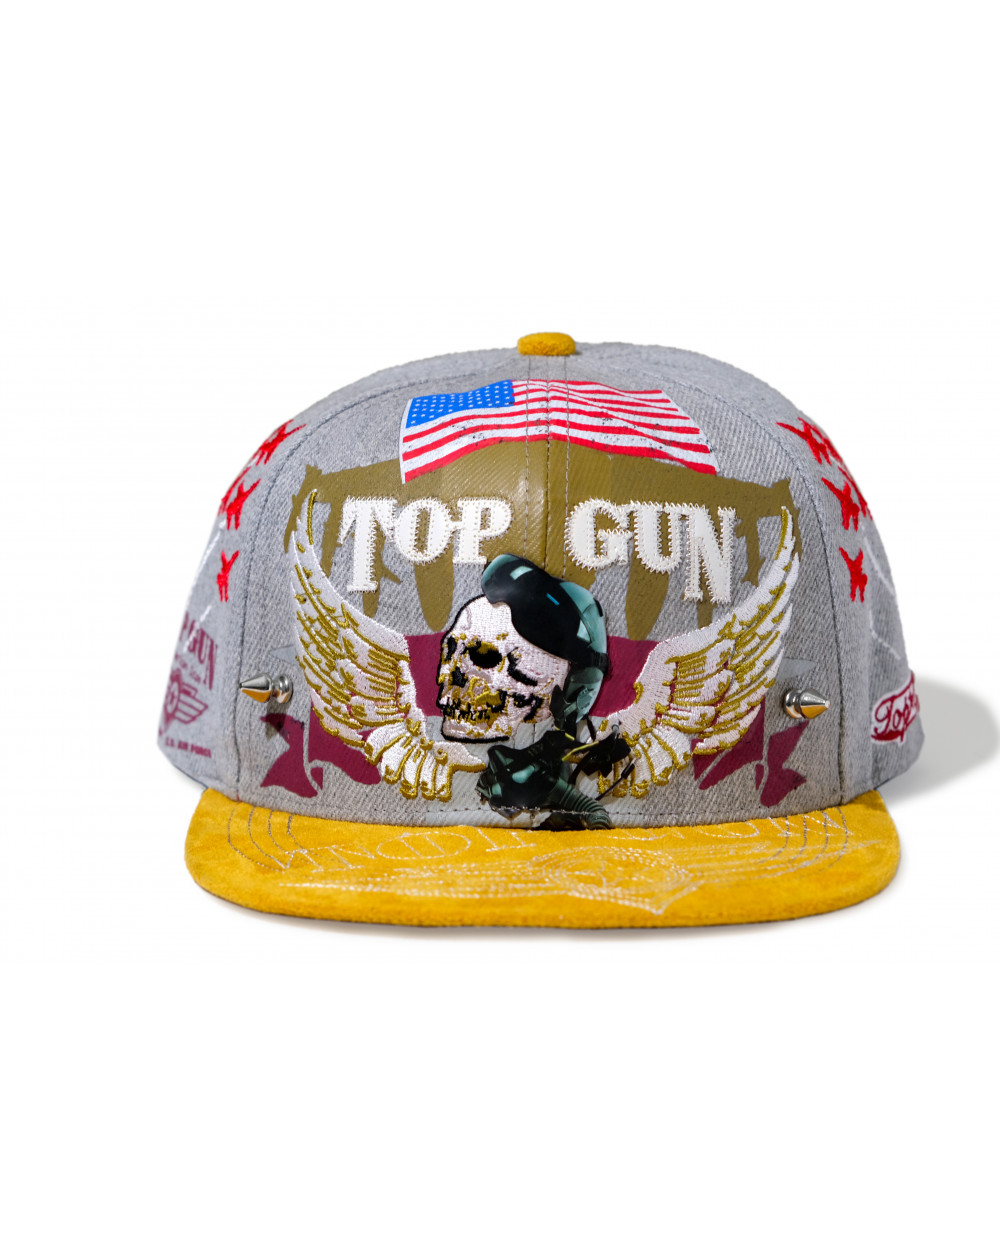 / EXCLUSIVE Limited Snap - & Grey Edition TOP GUN® Numbered